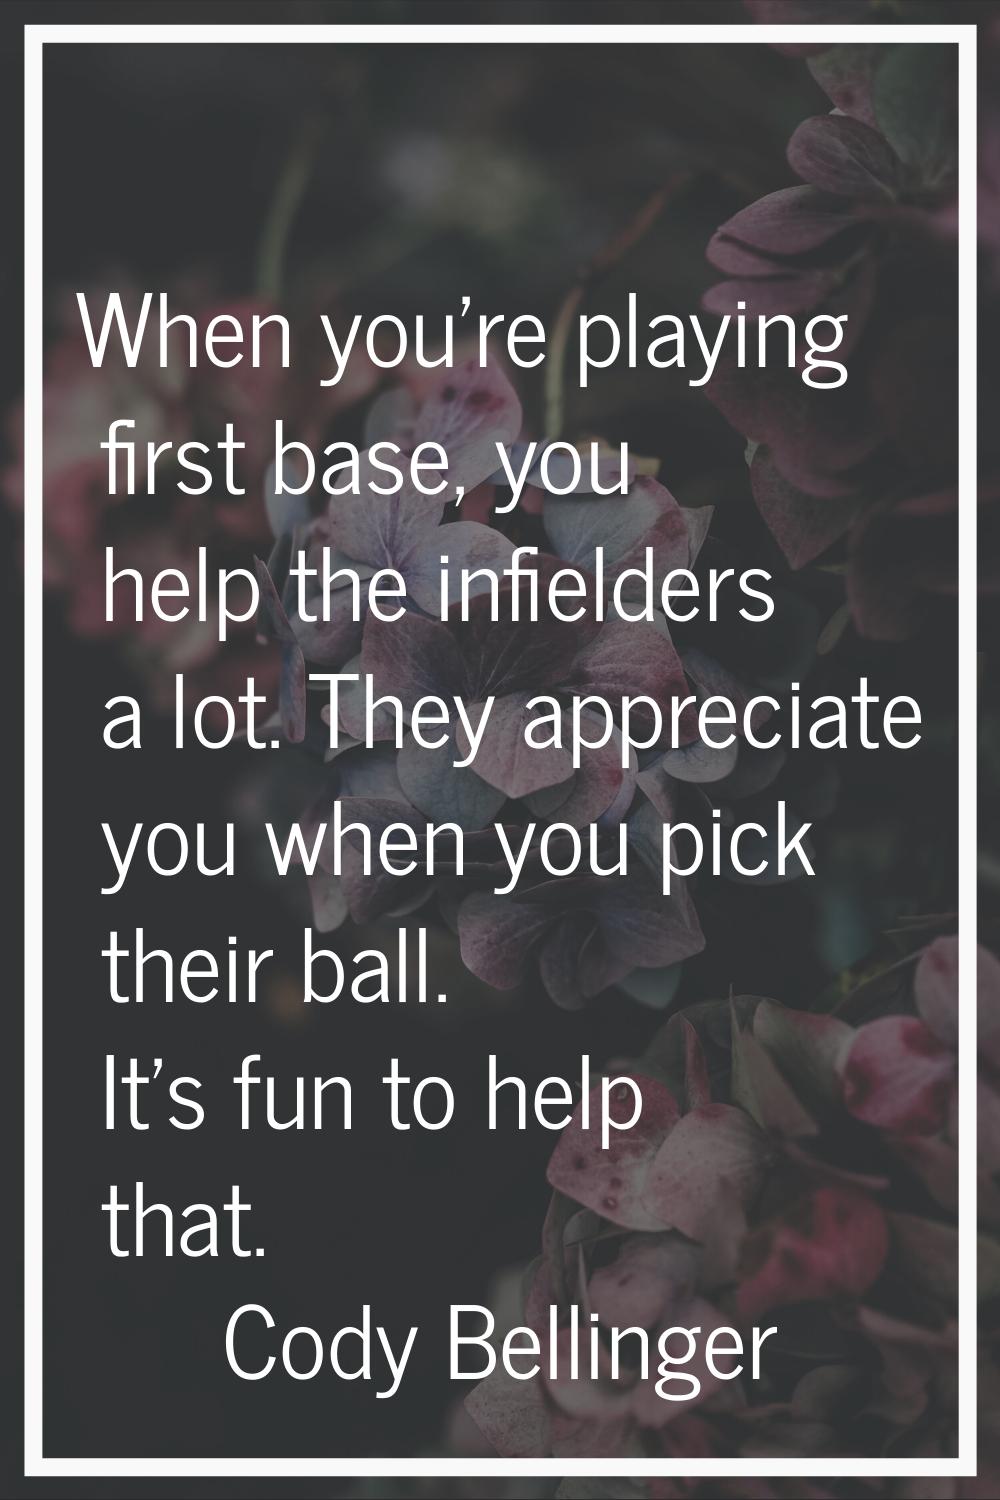 When you're playing first base, you help the infielders a lot. They appreciate you when you pick th